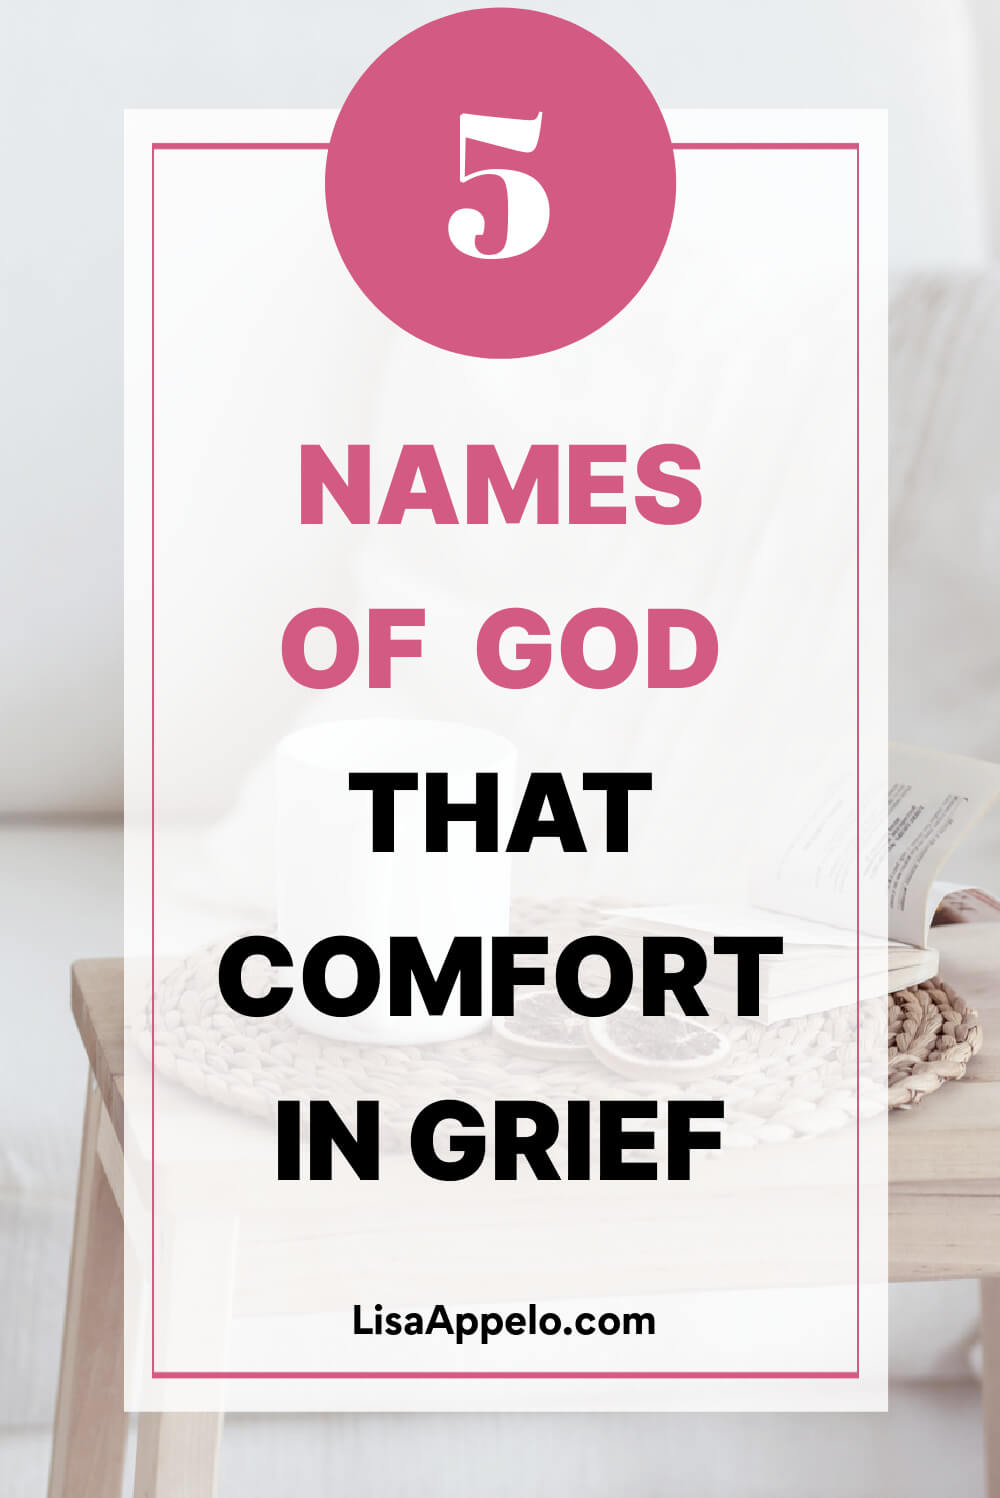 Names of God that Comfort in Grief